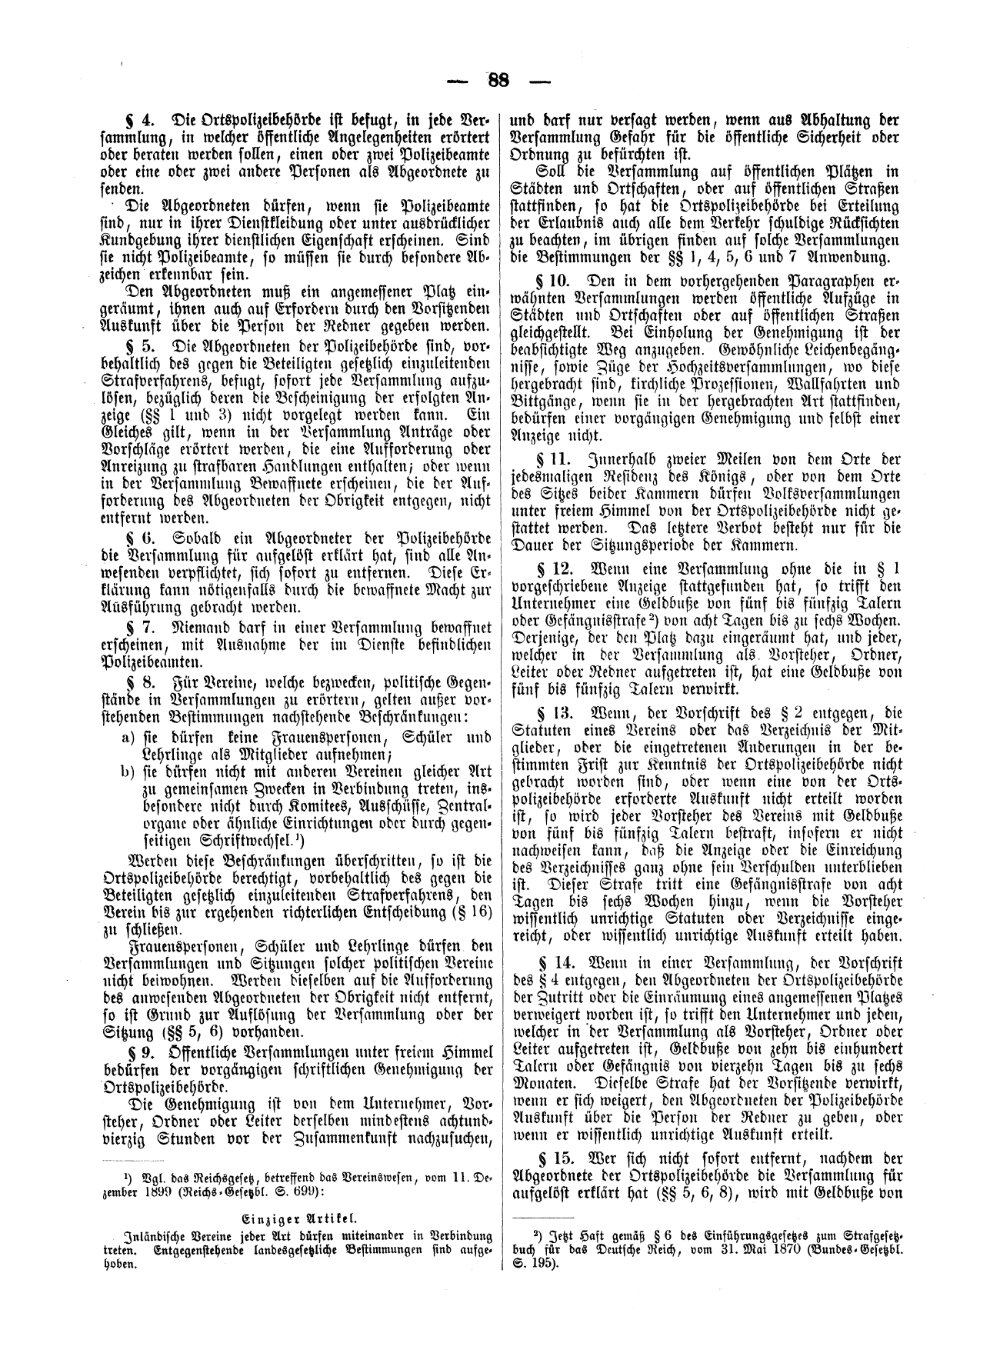 Scan of page 88